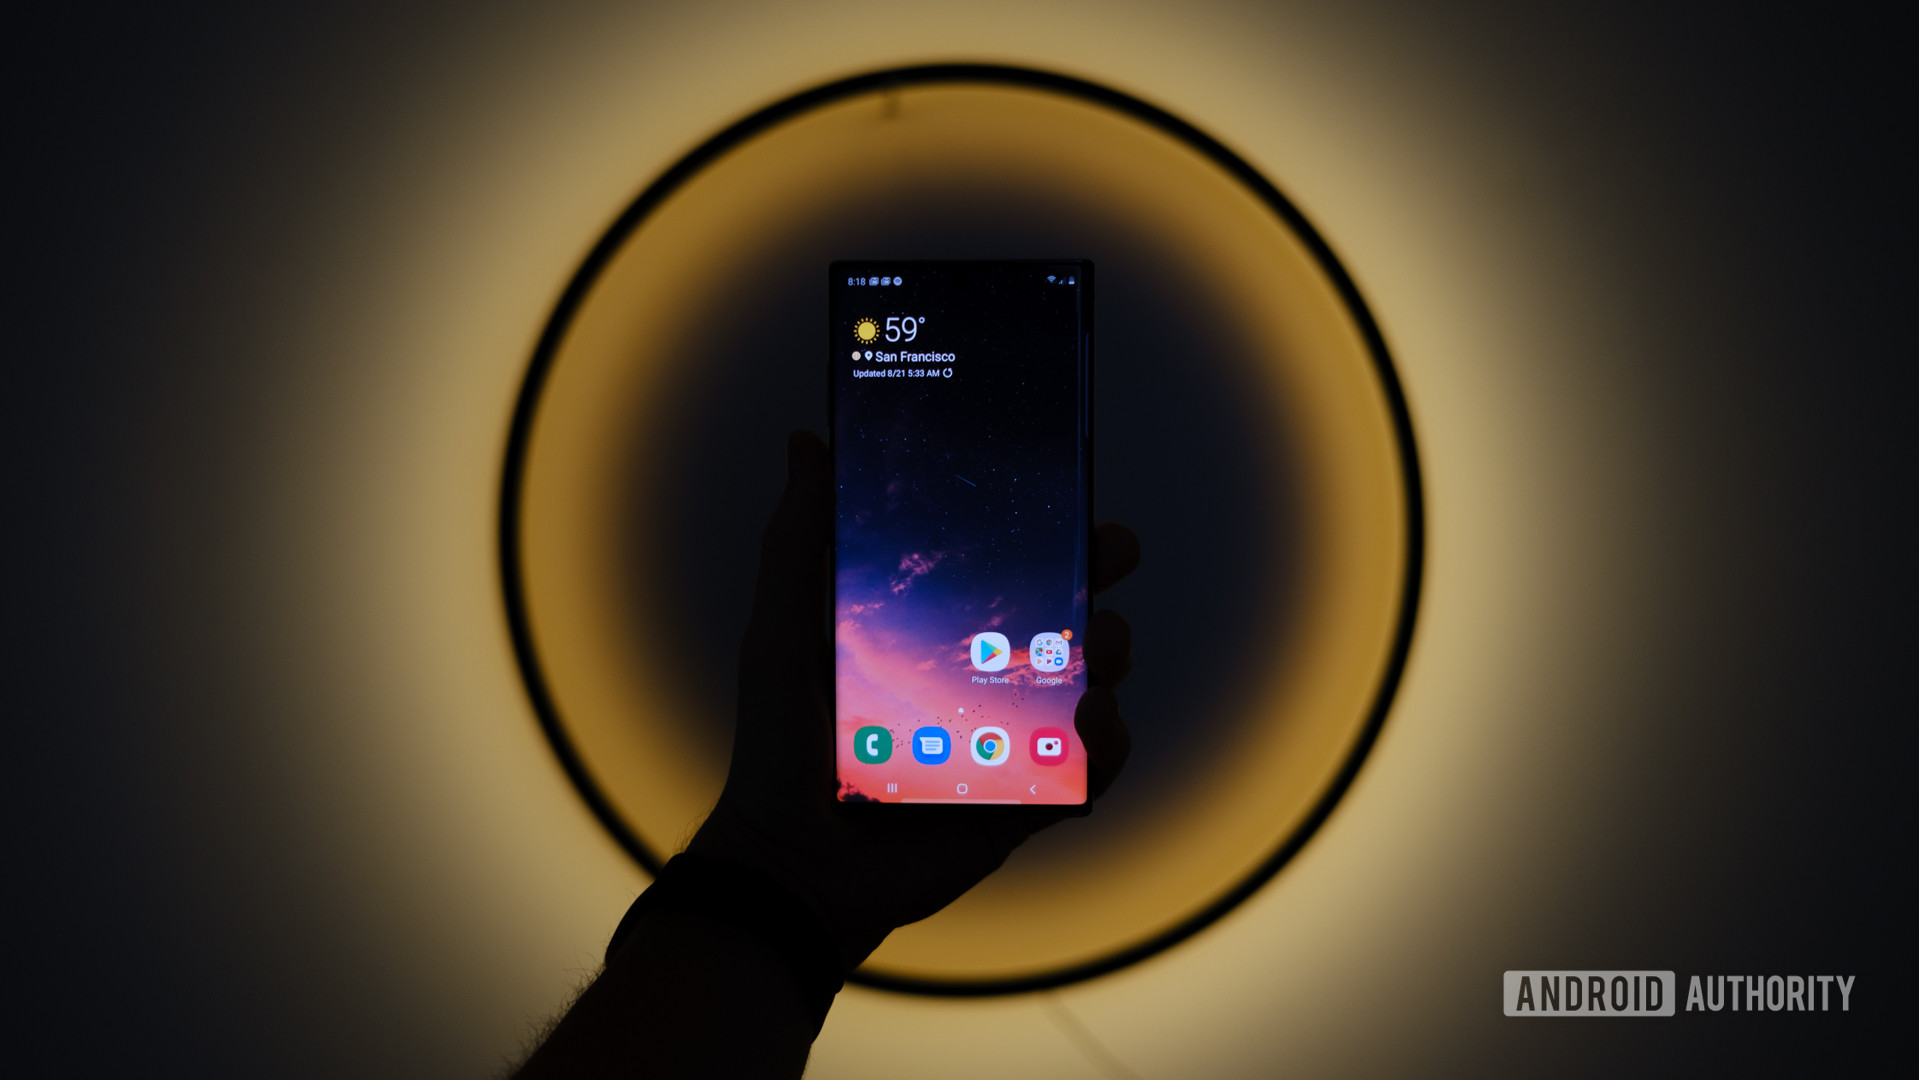 Samsung Galaxy Note 10 Plus screen in front of lamp